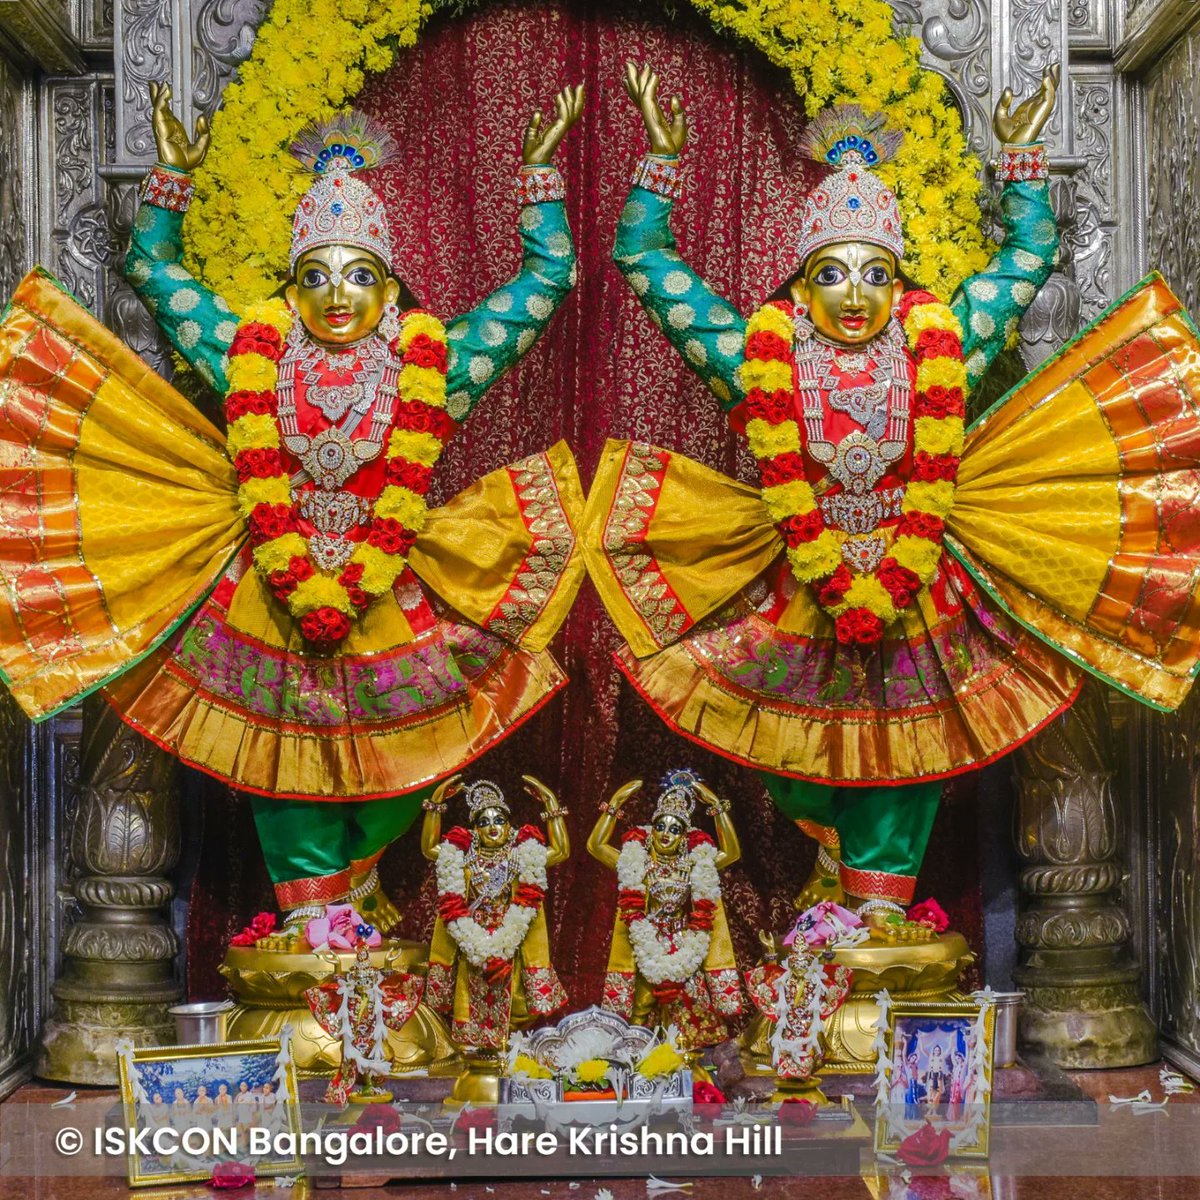 Today's special Chandan Alankara Darshan from ISKCON Sri Radha Krishna Temple, Rajajinagar. Devotees can have this Darshan of the Lord till 30 May 2024. During the Chandan Yatra, Srinivasa Govinda's body is anointed with sandalwood paste to keep His body cool in the summer heat.